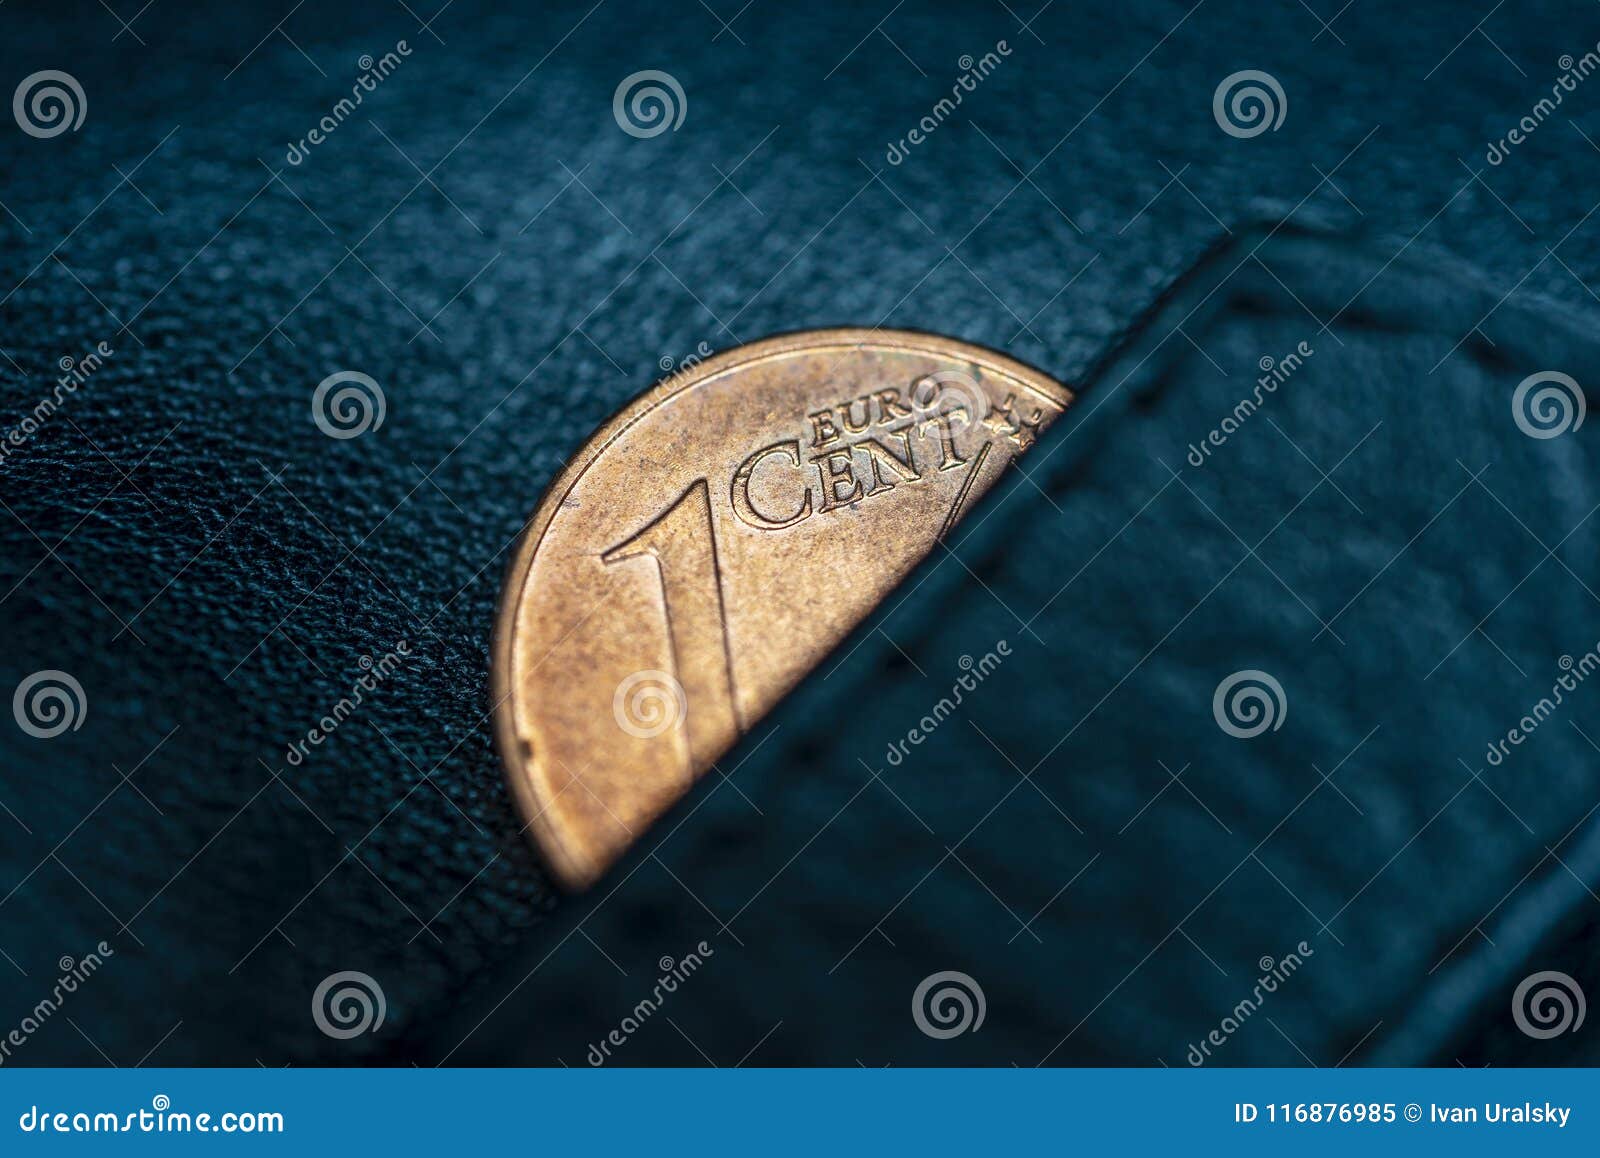 a black leather wallet and one cent of euro, to ize poverty, bankrupt or thrift, frugality and economy